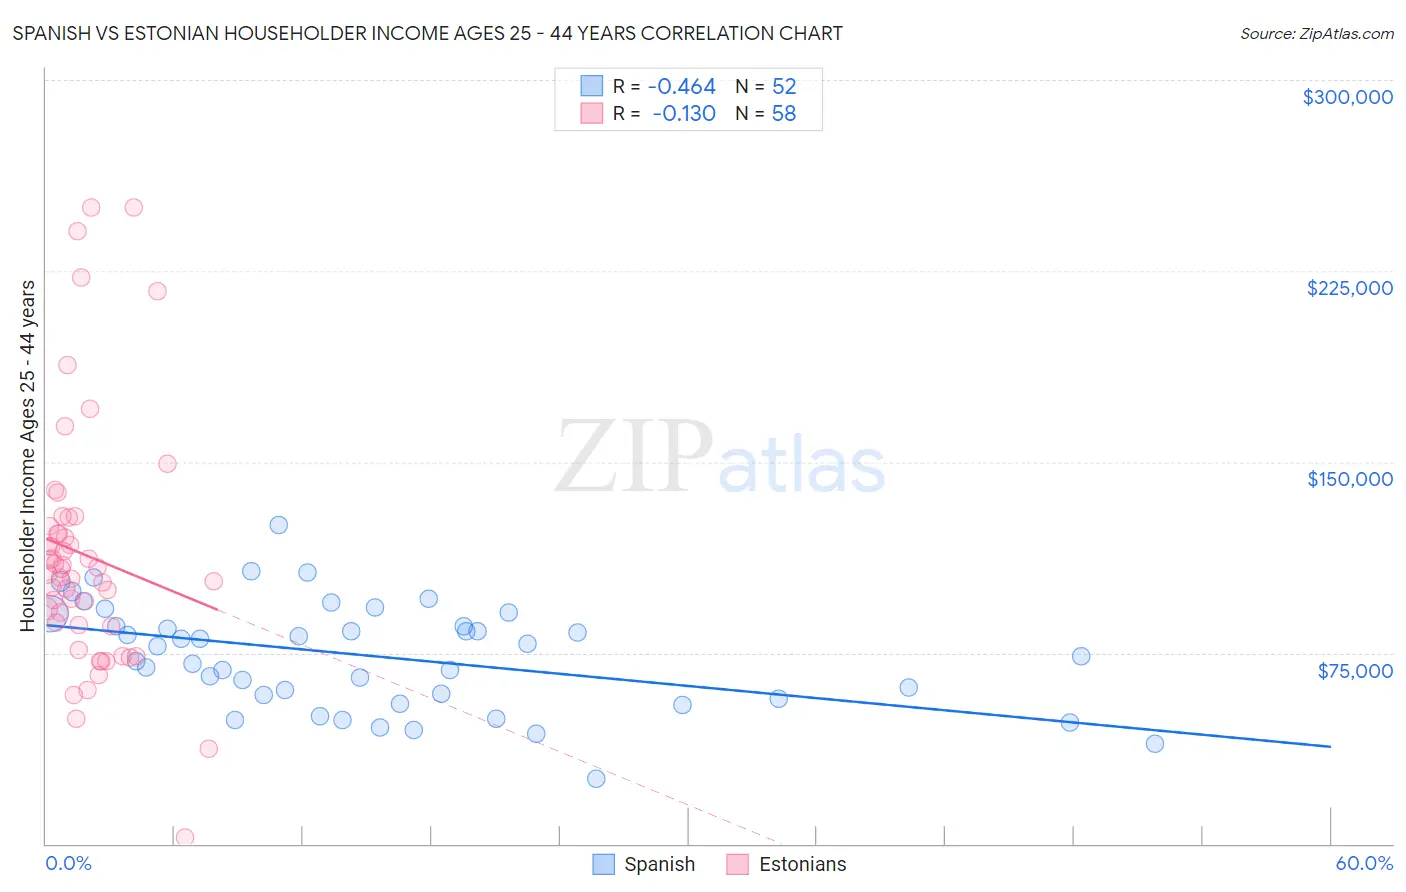 Spanish vs Estonian Householder Income Ages 25 - 44 years